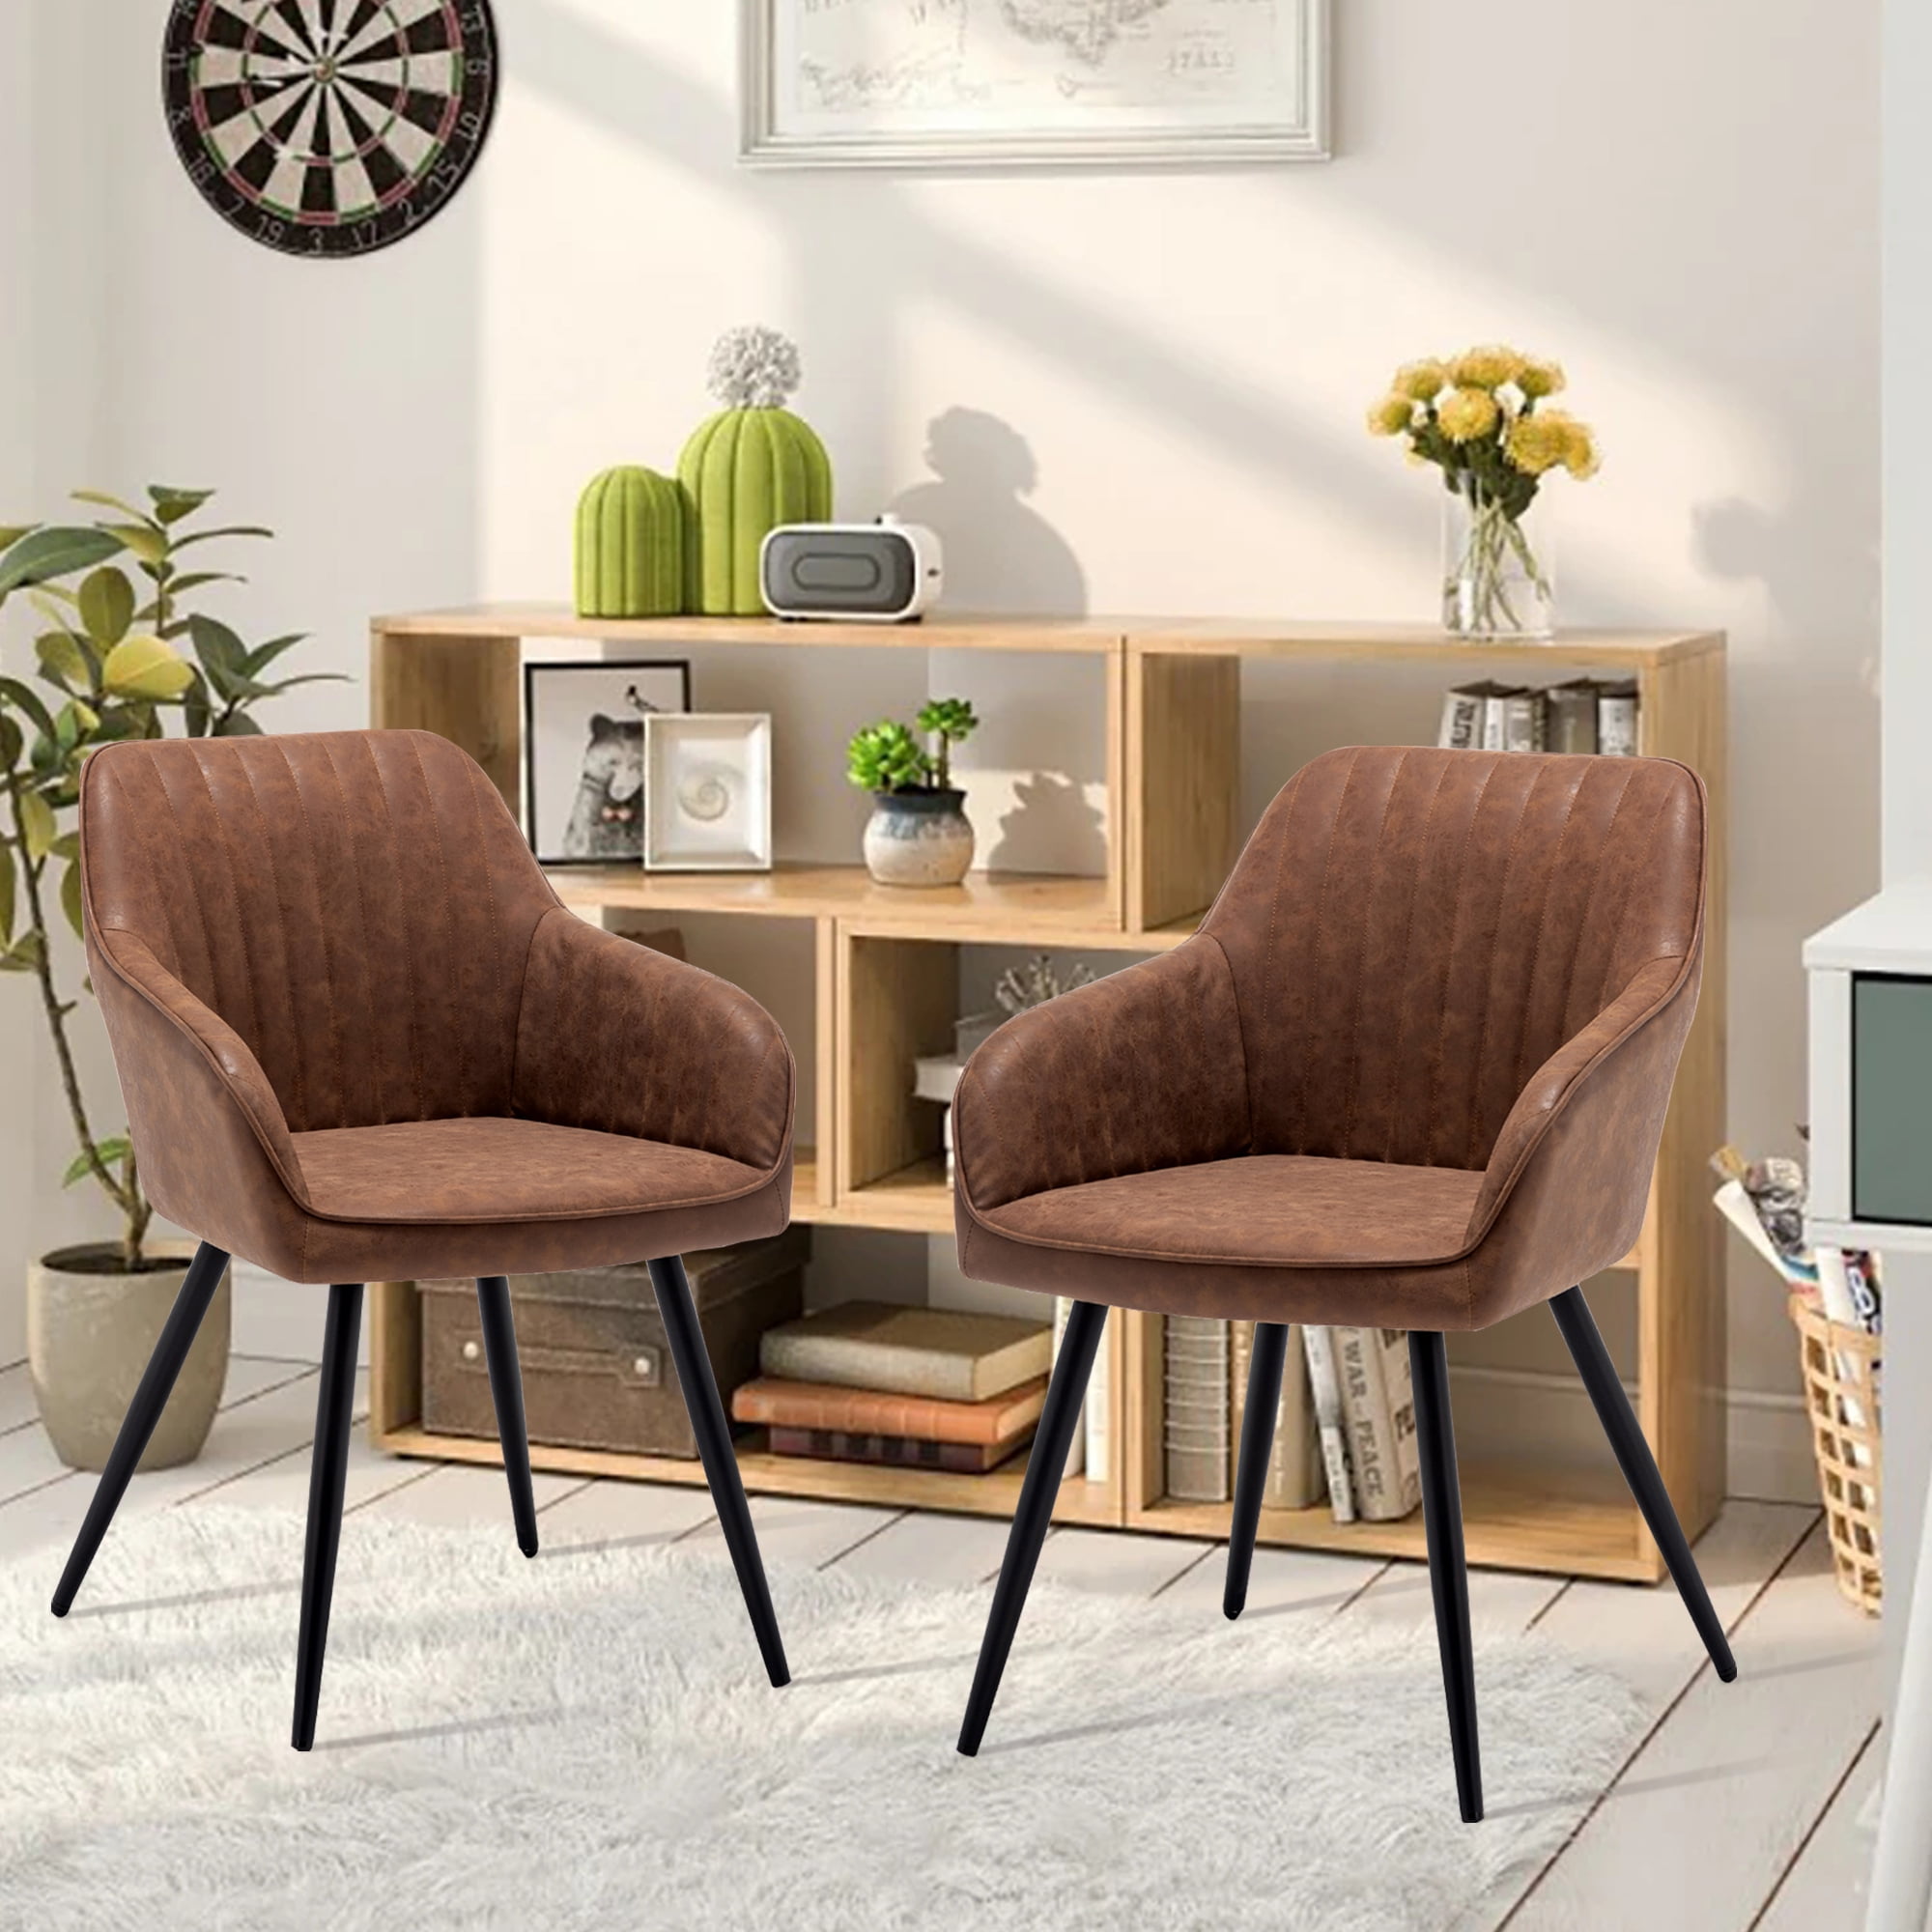 NIUTN Dining Chairs Set of 2,Modern Kitchen Dining Room Chairs,Upholstered Dining Accent Side Chairs in Faux Leather Cushion Seat and Sturdy Metal